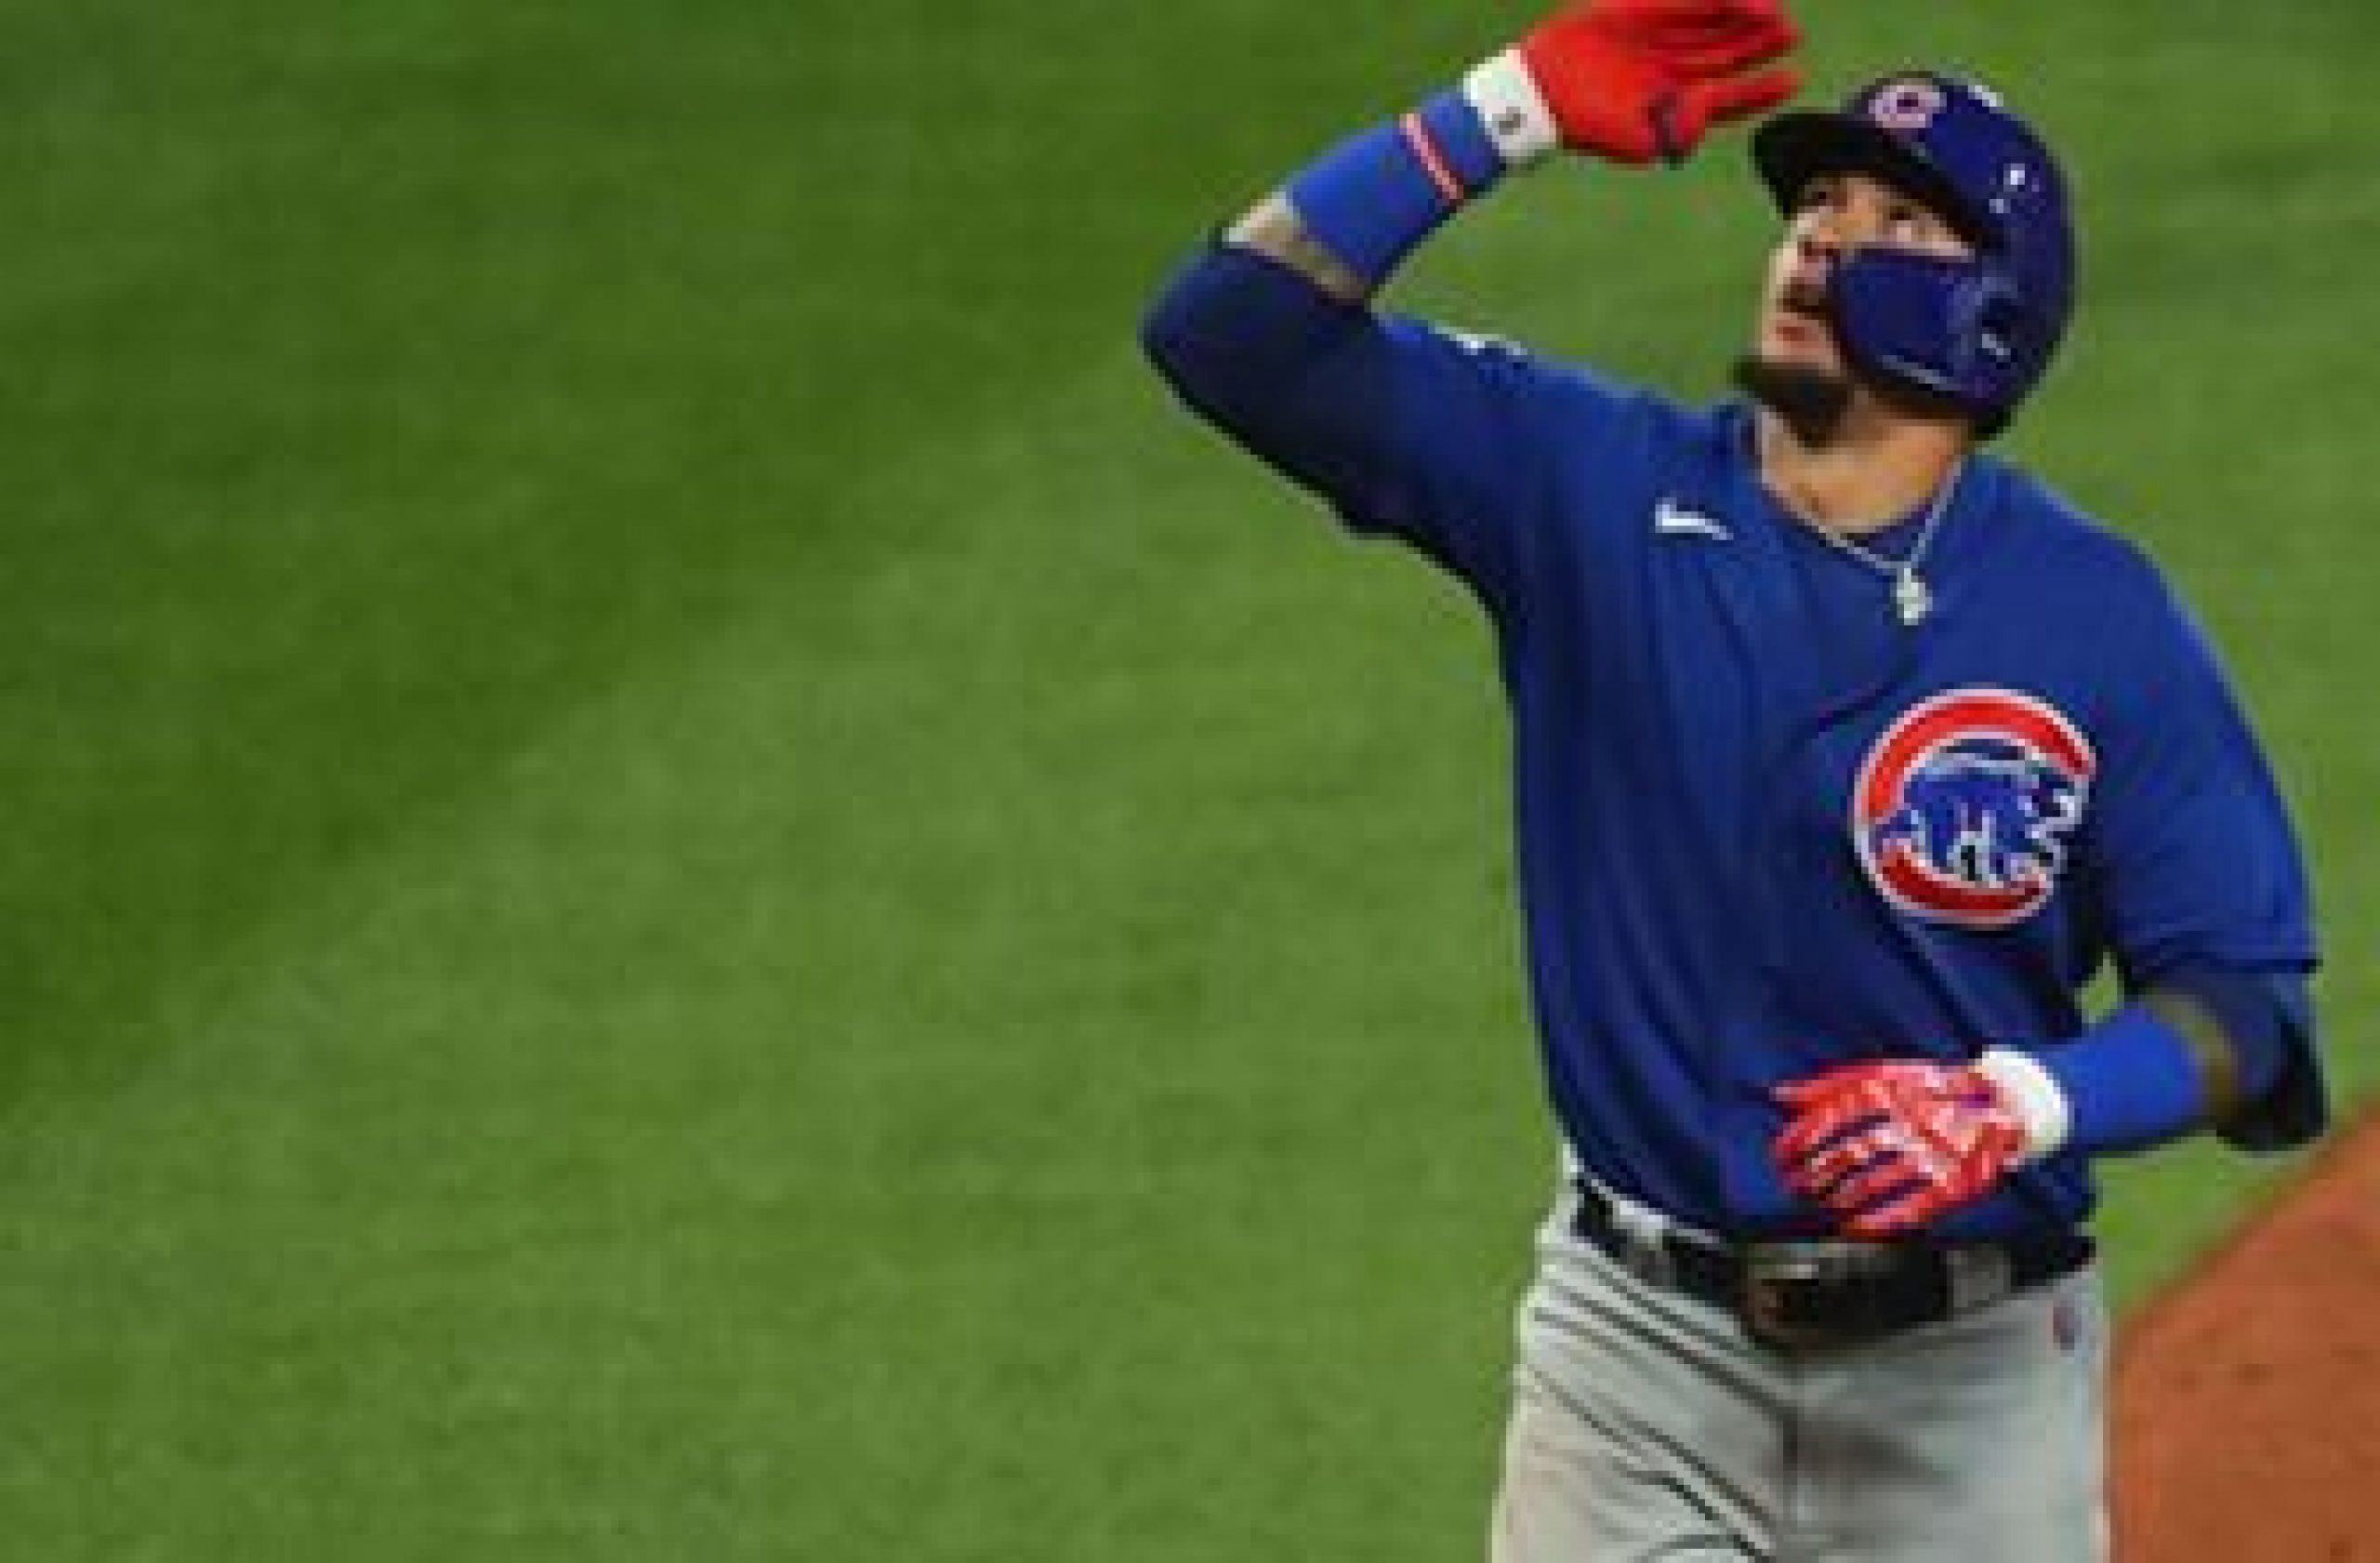 Javier Baez launches two-run homer in extras as Cubs top Cardinals, 2-1